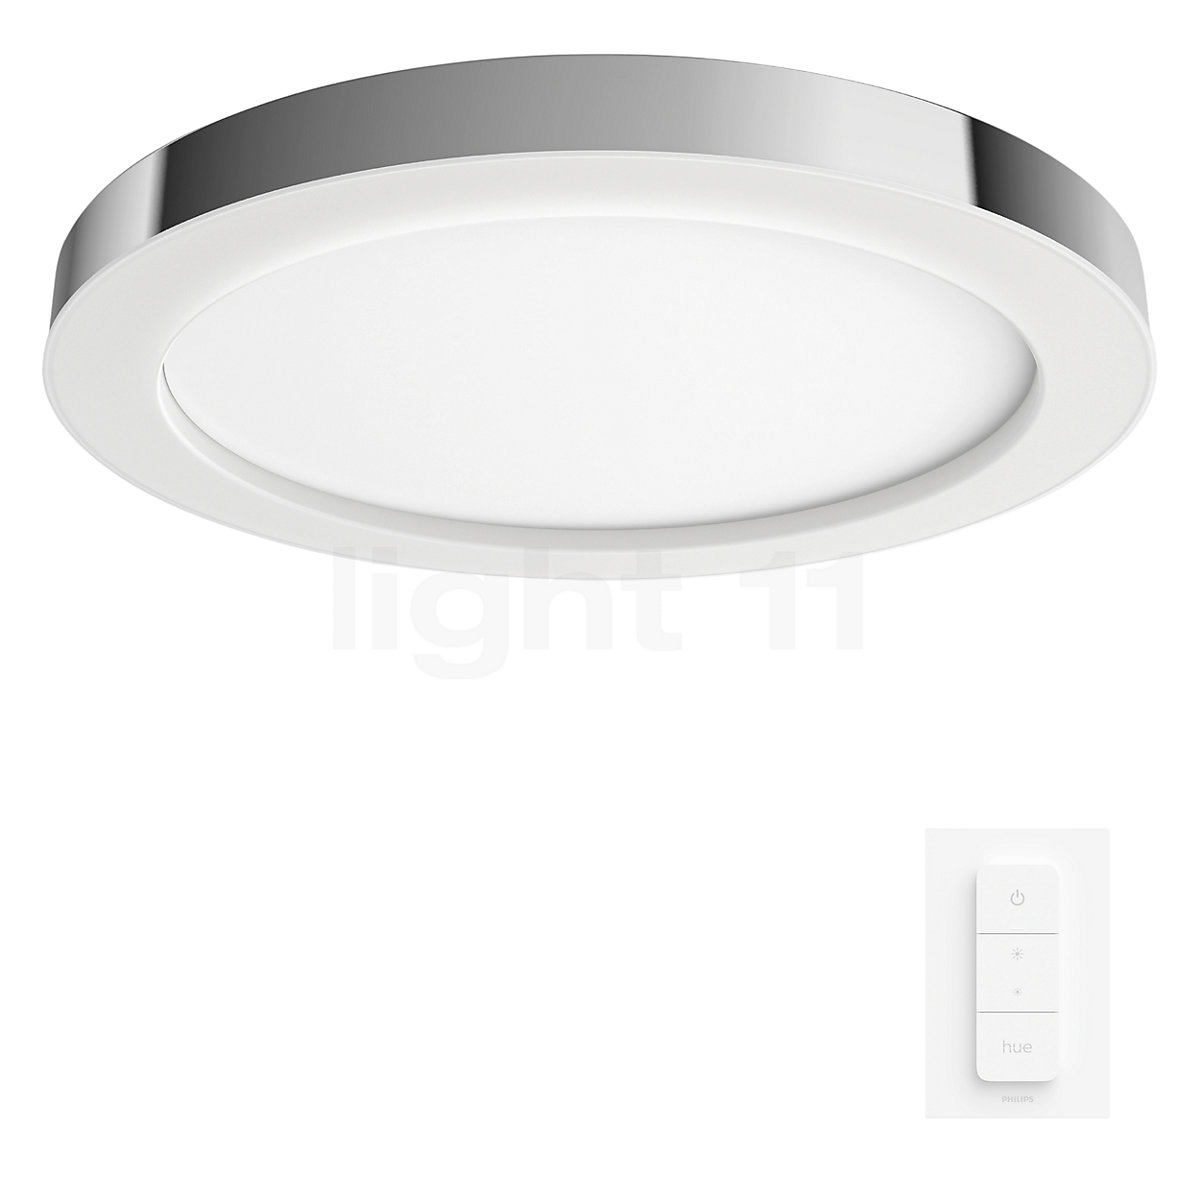 https://l11.scene7.com/is/image/L11/wh1200st/White_Ambiance_Adore_Ceiling_Light_LED_with_dimmer_switch_chrome--fe179689b10d9c14684511373d16d656.jpg